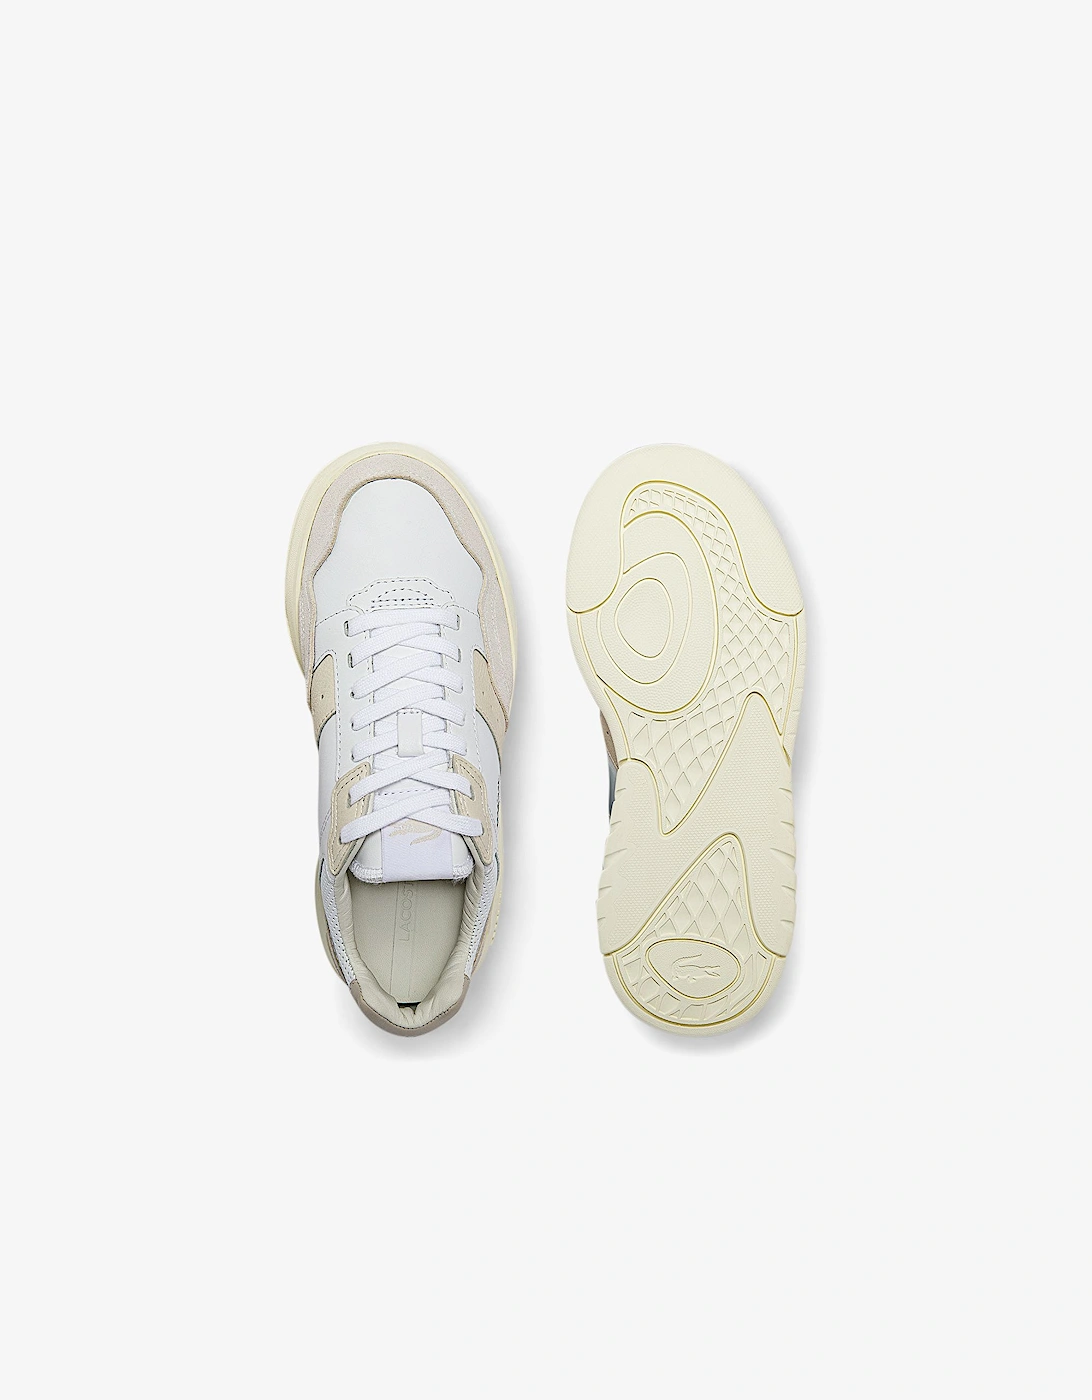 Womens Gameadvance Luxe Trainers